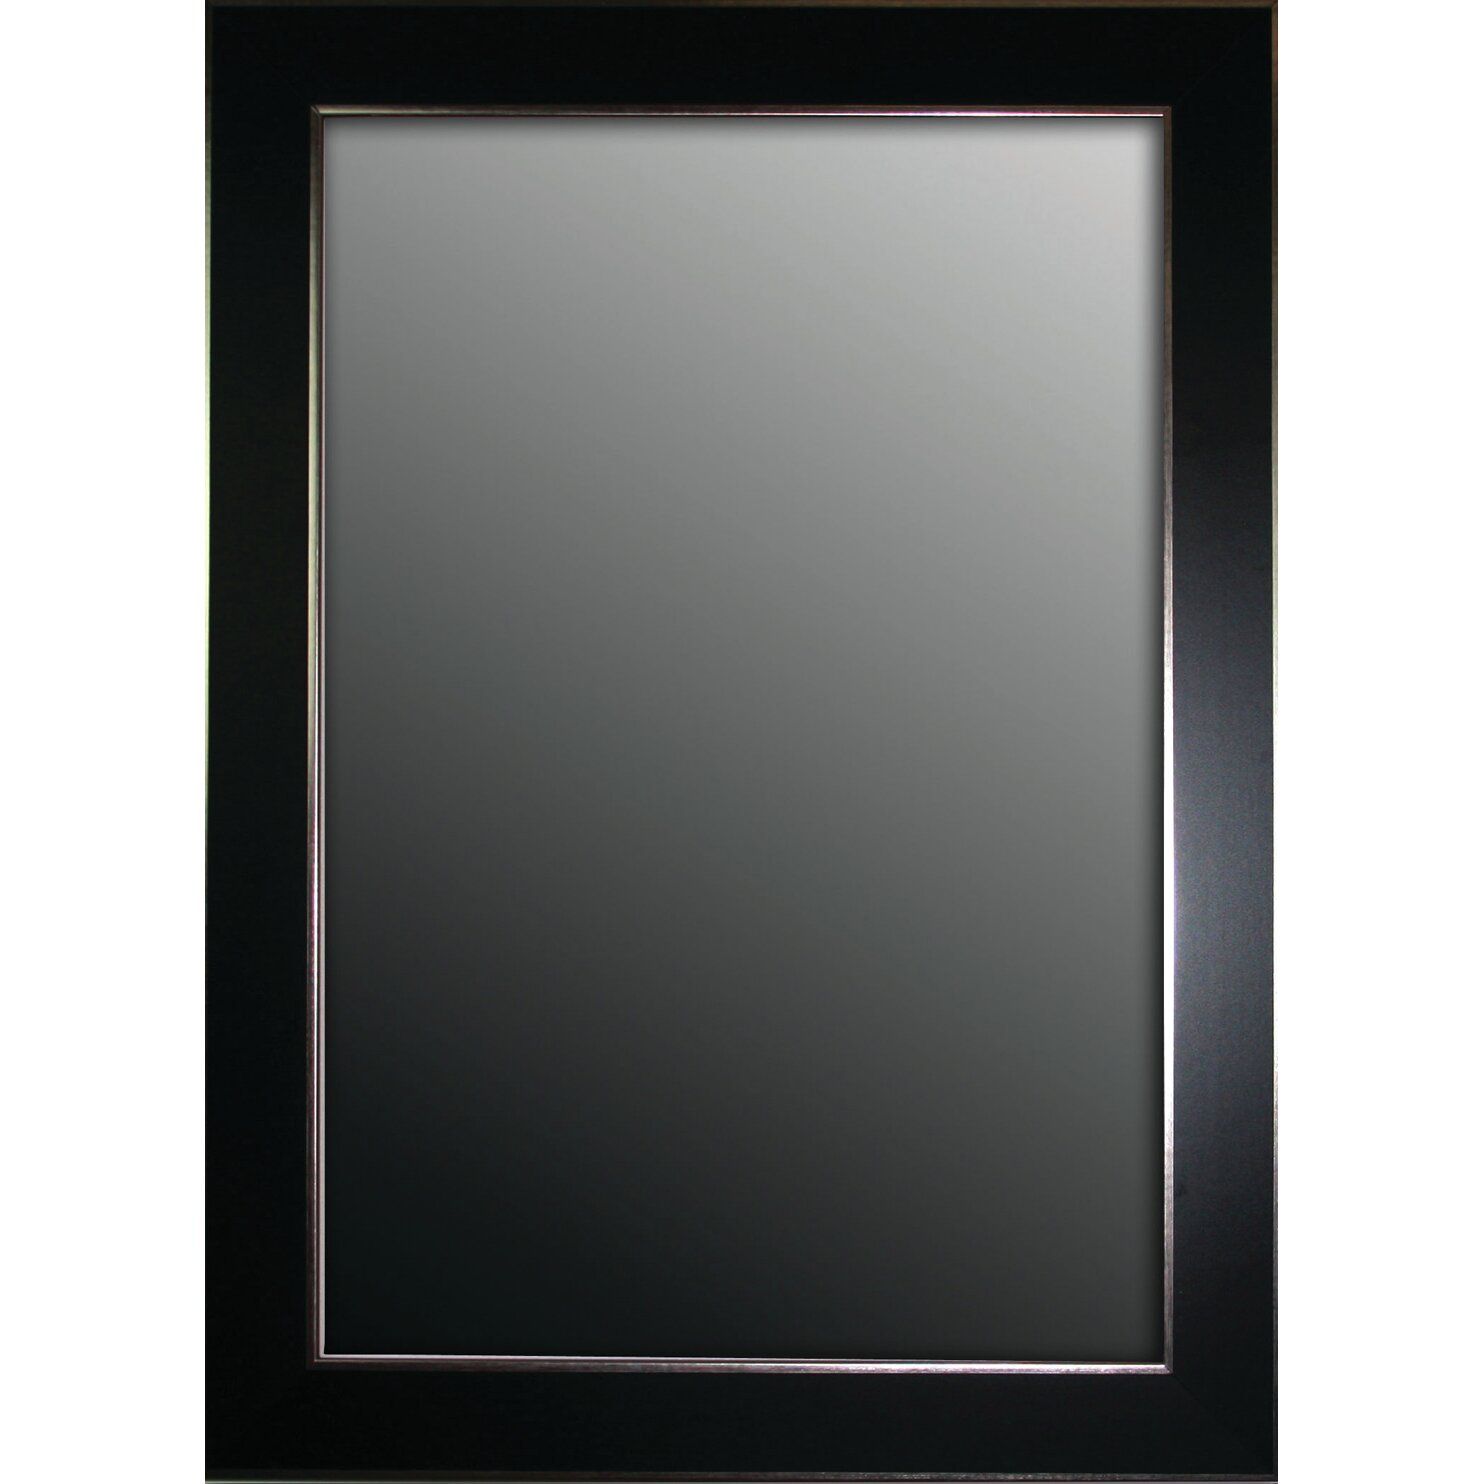 Second Look Mirrors Semi Matte Black With Silver Trim Edges Wall Mirror Inside Smoke Edge Wall Mirrors (View 3 of 15)